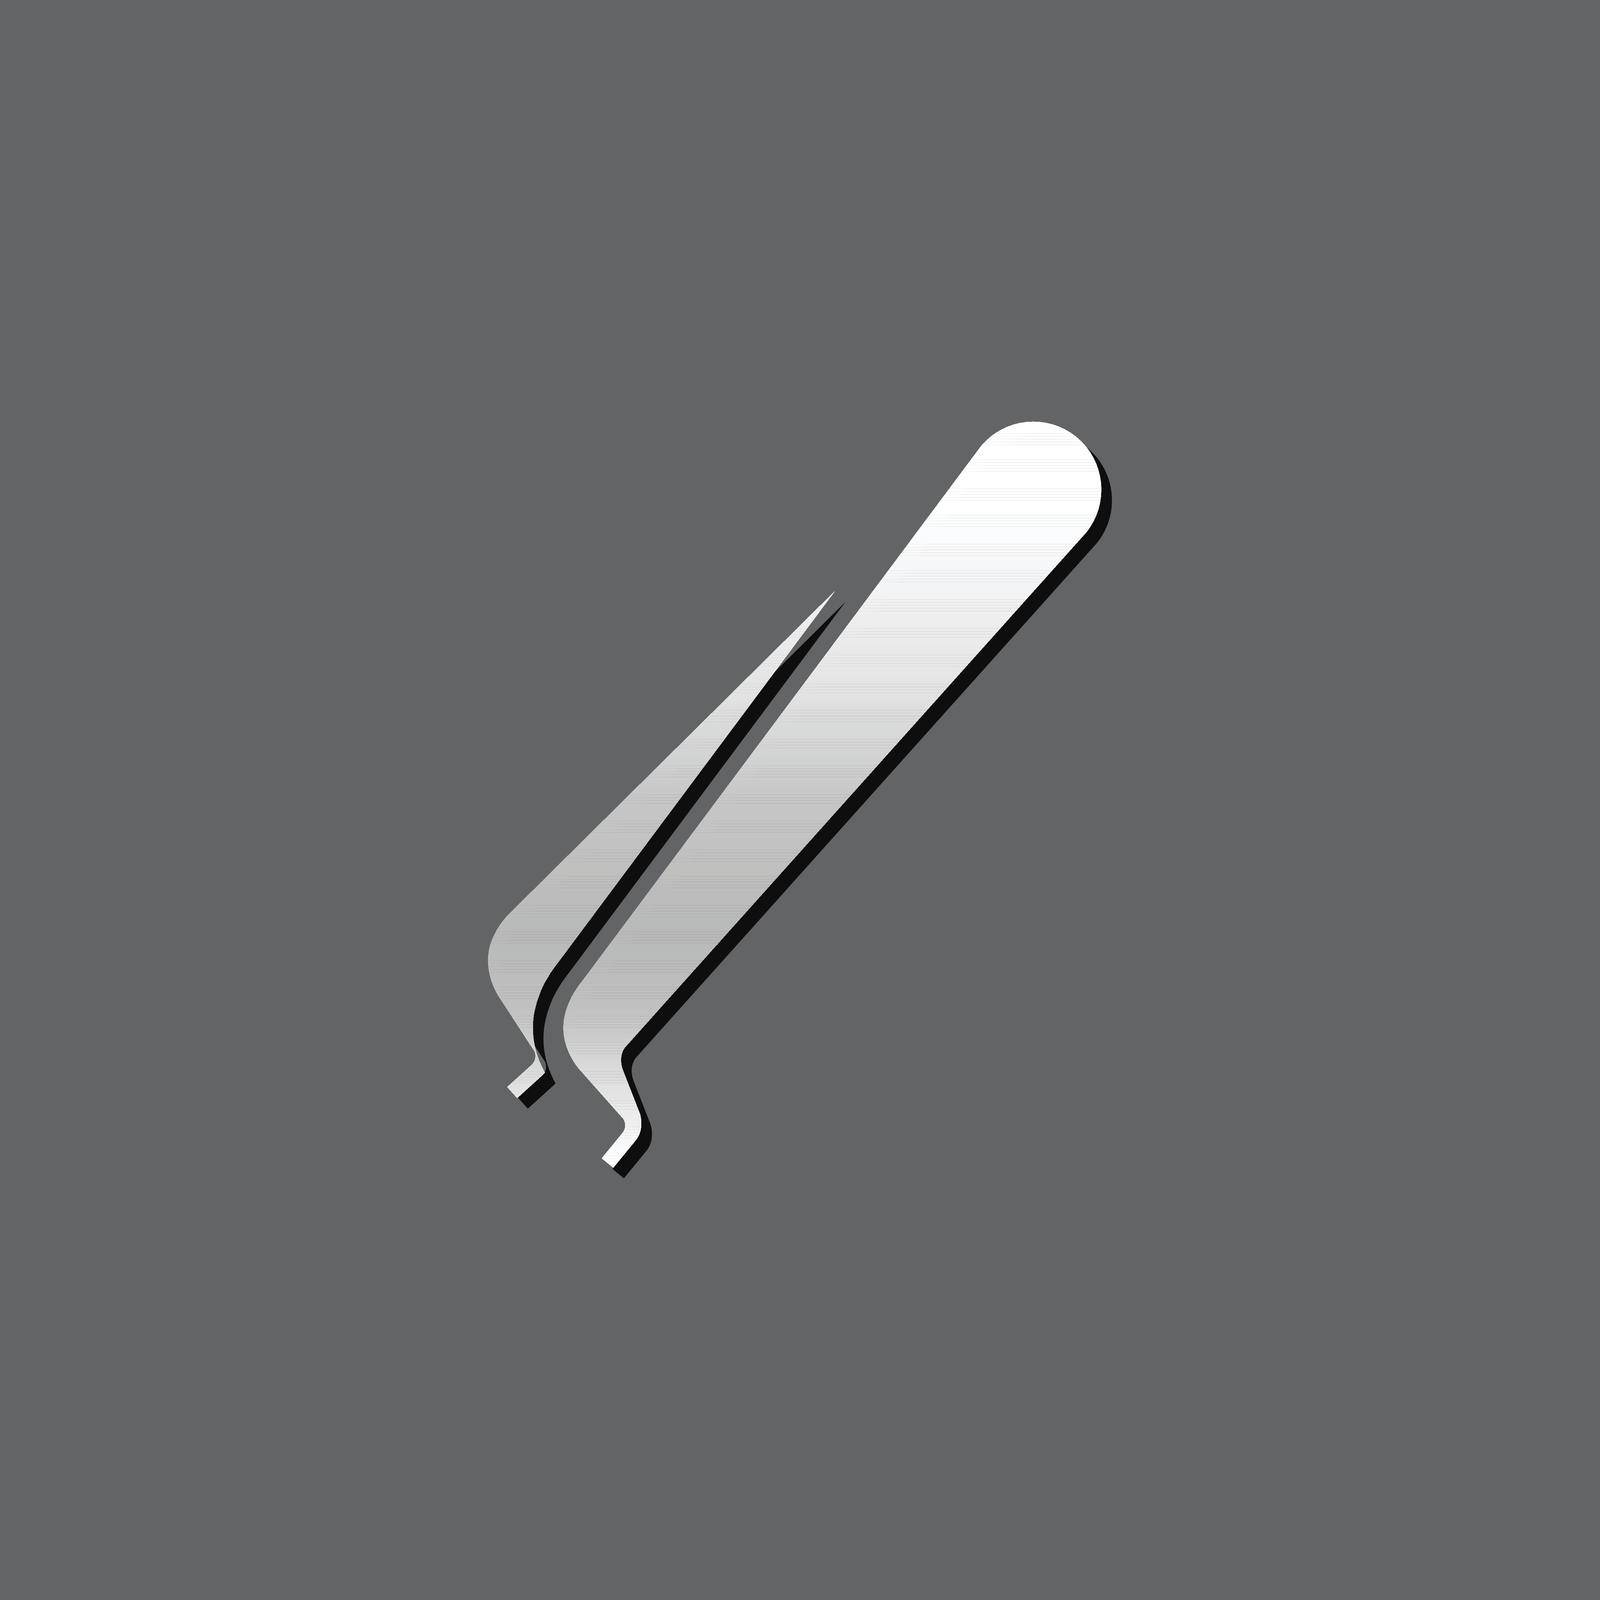 Tweezers icon in metallic grey color style.Electronic parts removal